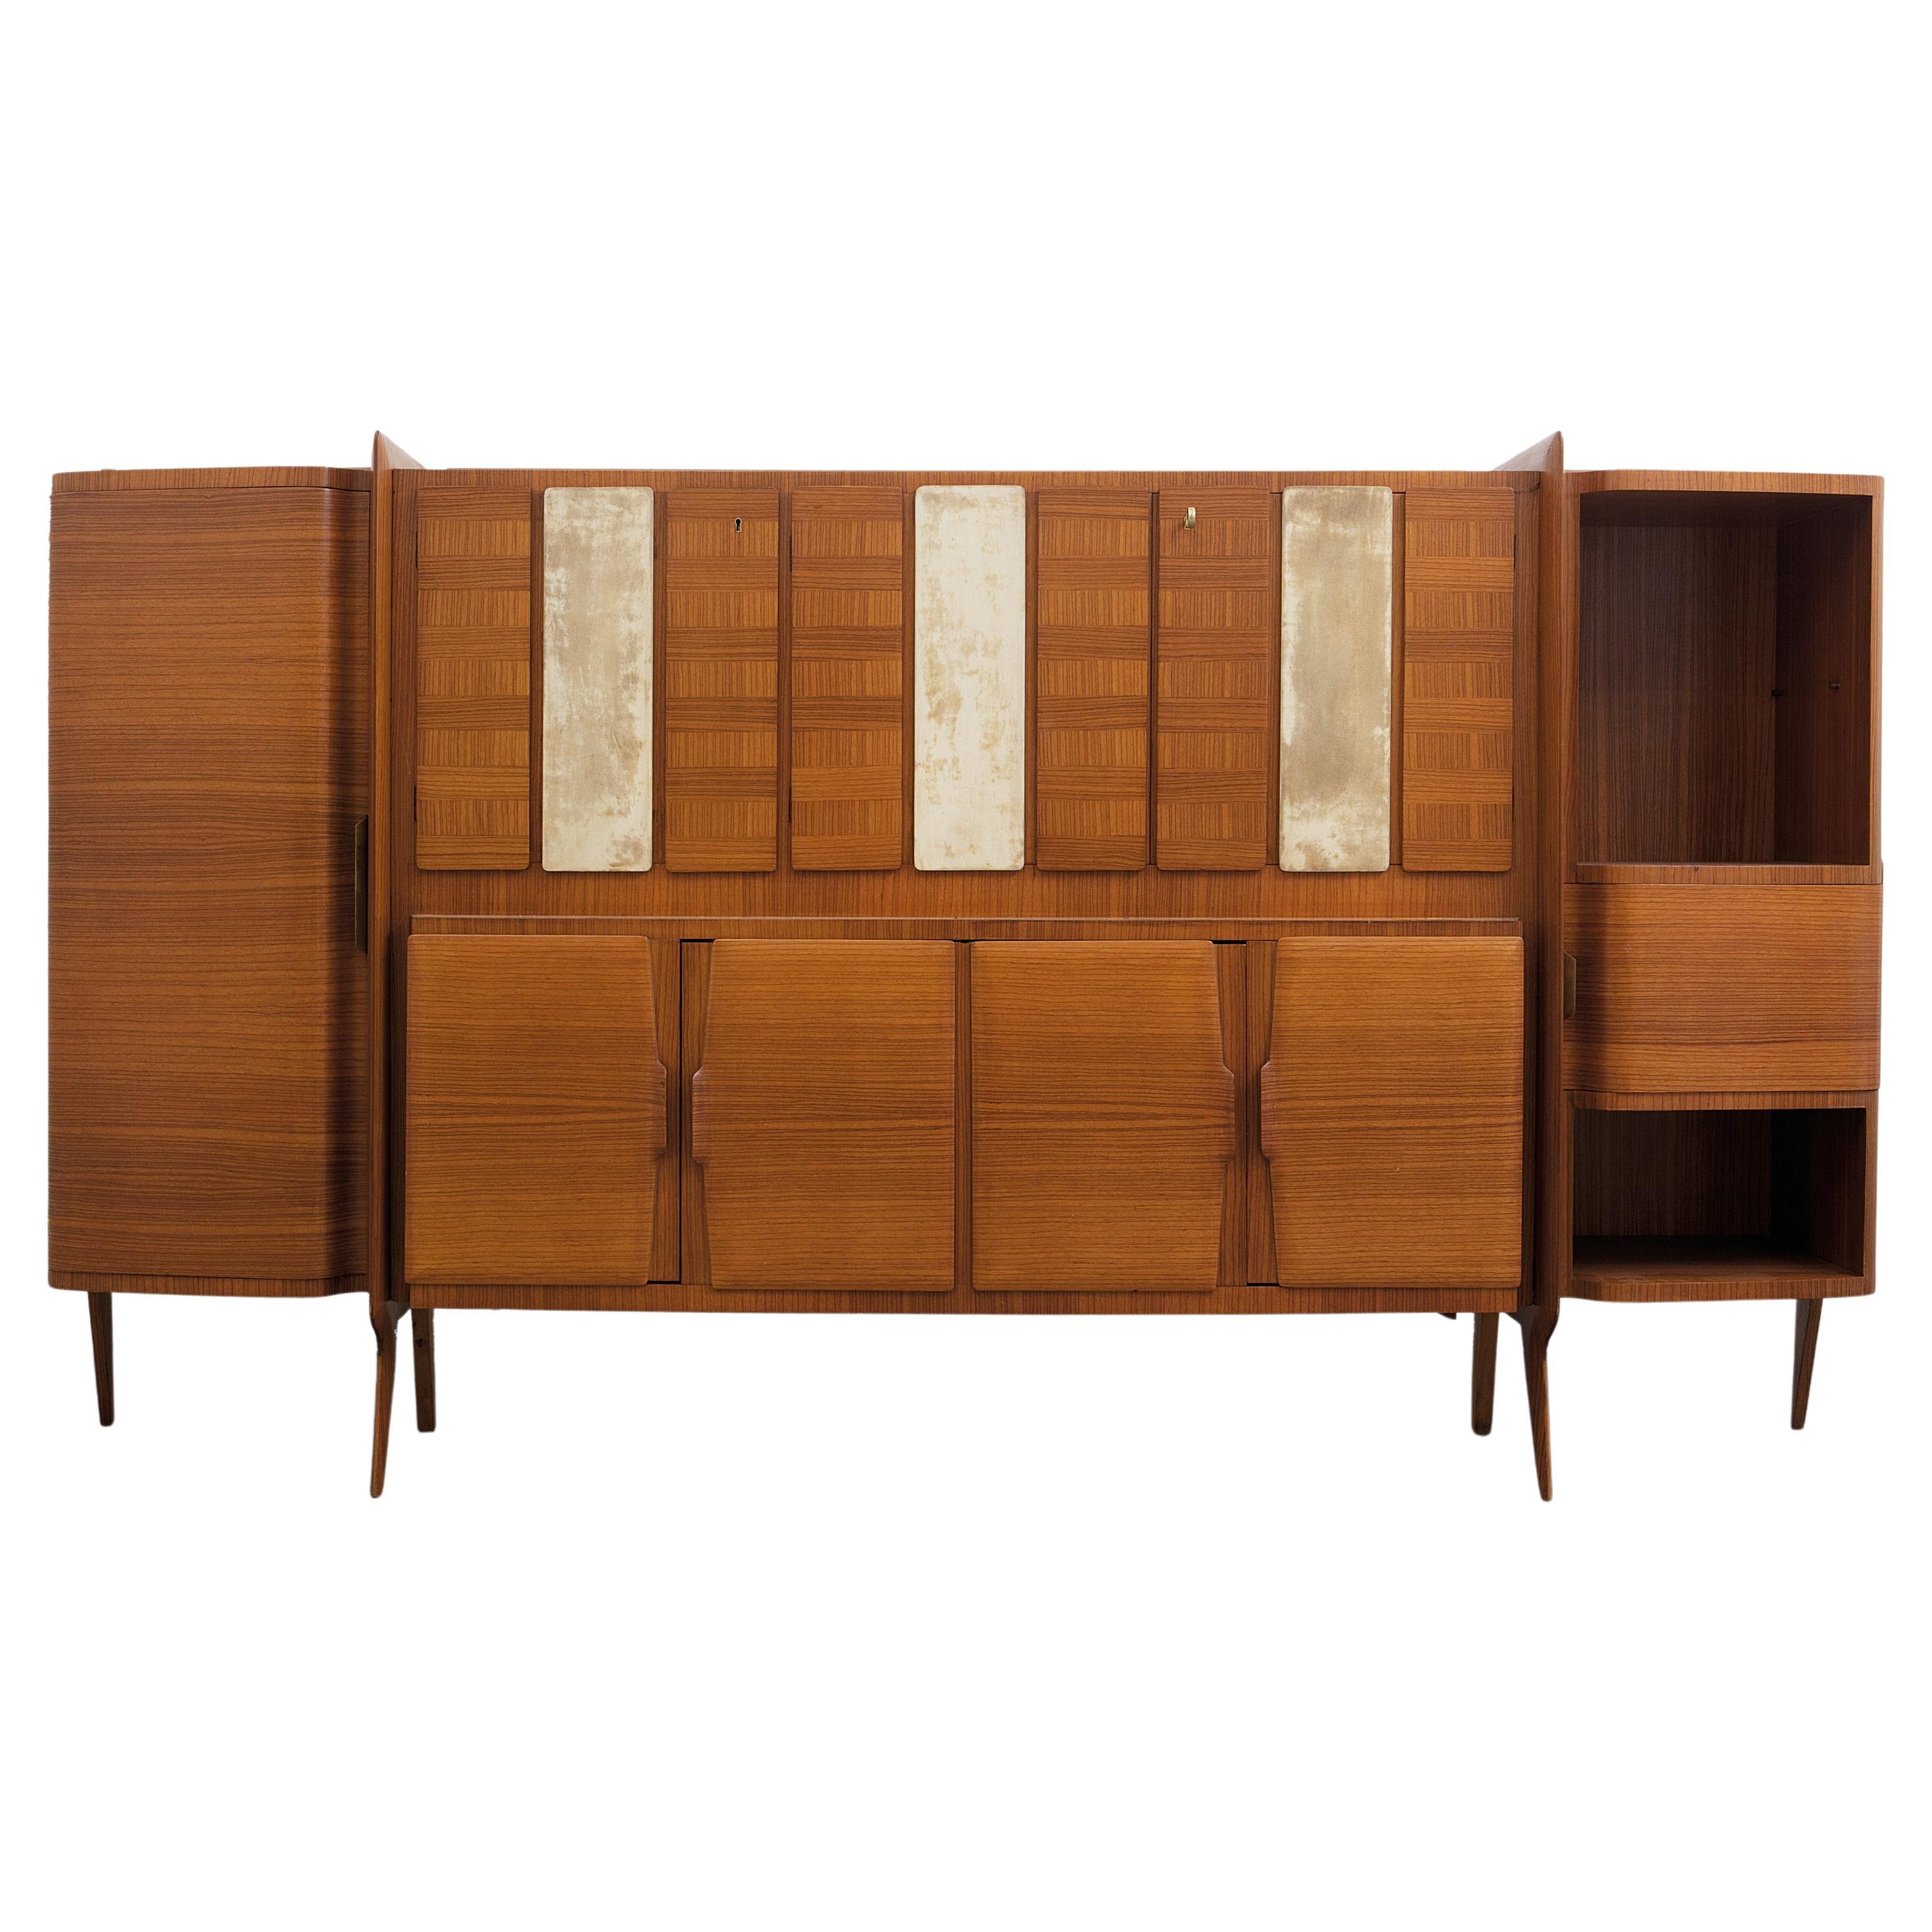 Monumental Wooden Cabinet with Parchment Panels by Gio Ponti, Italy For Sale